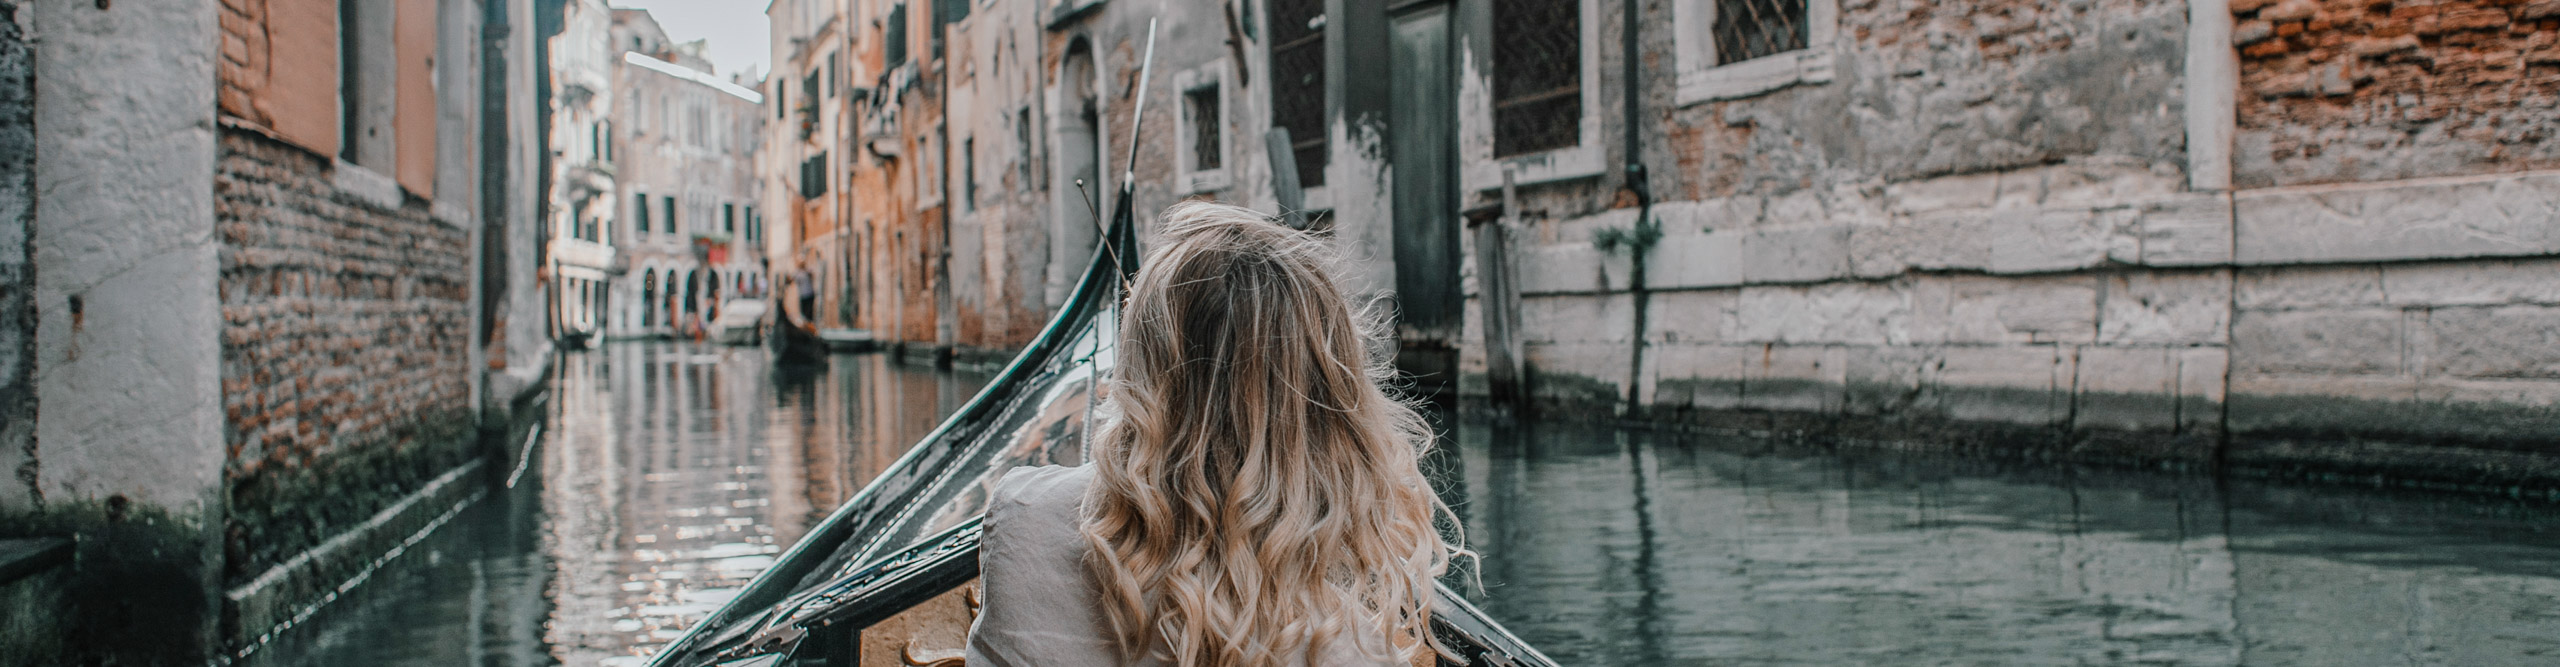 Traveller on Gondola in the Canals of Venice